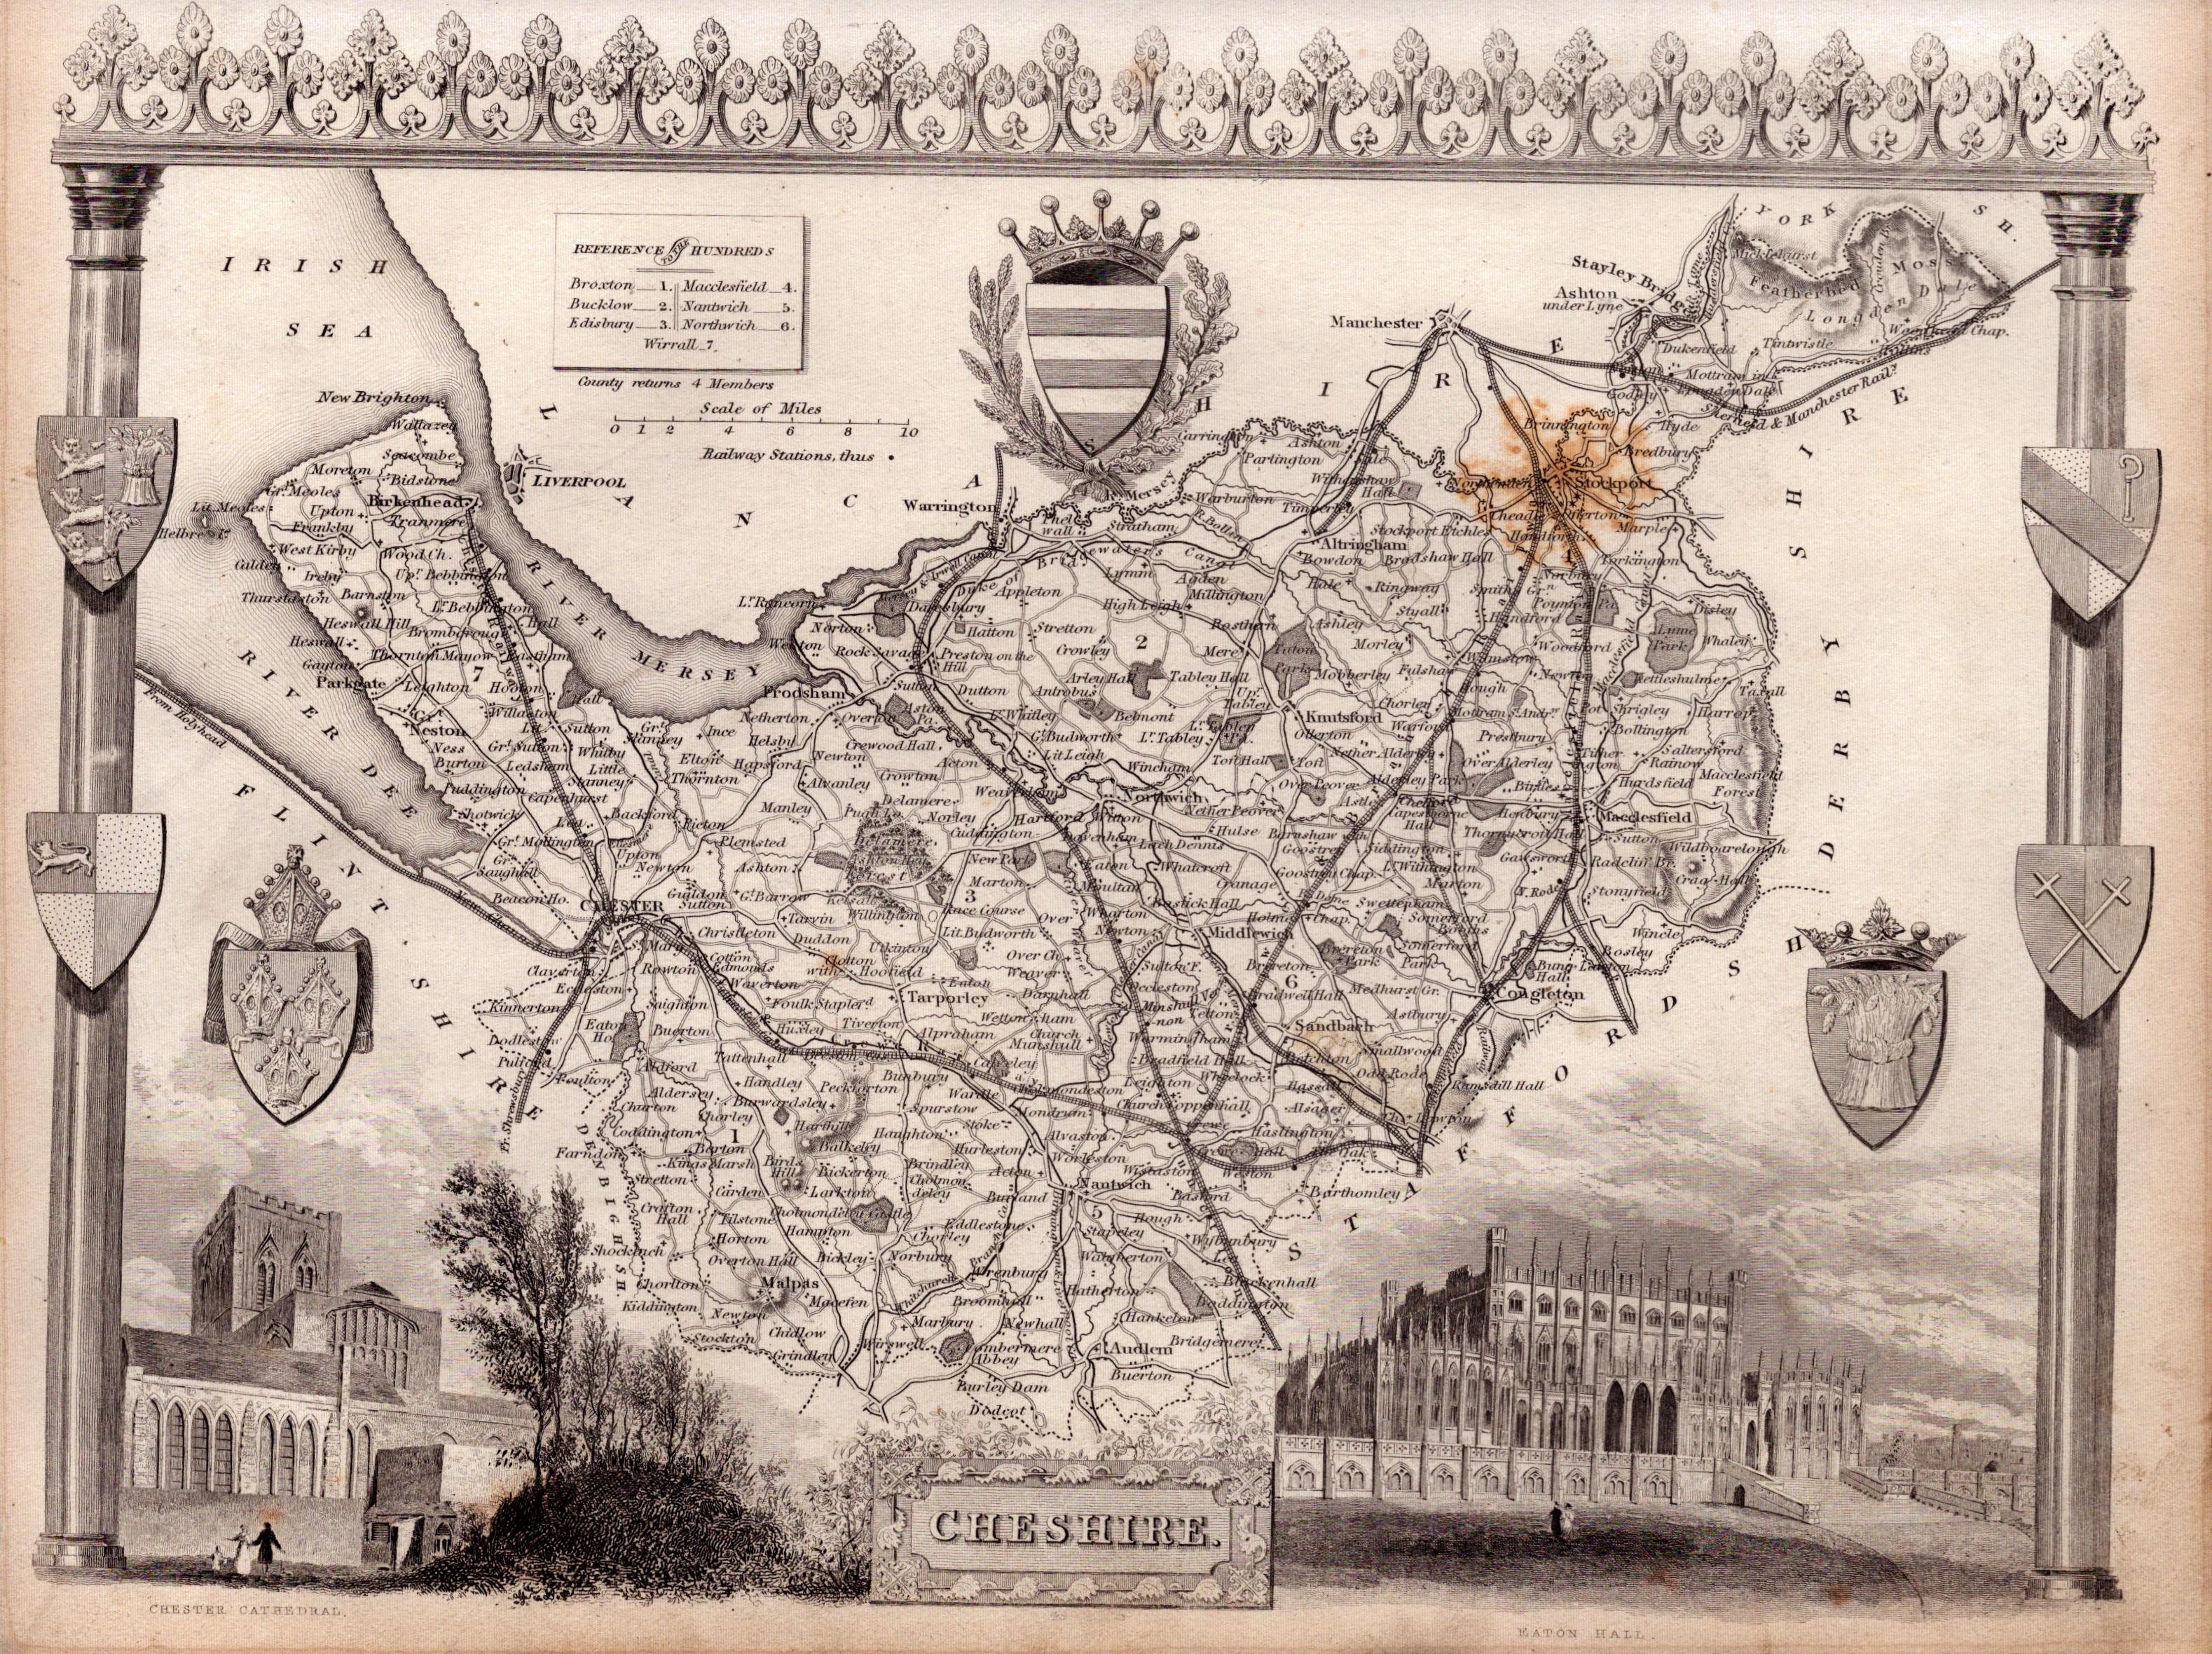 Cheshire Steel Engraved Victorian Antique Thomas Moule Map.